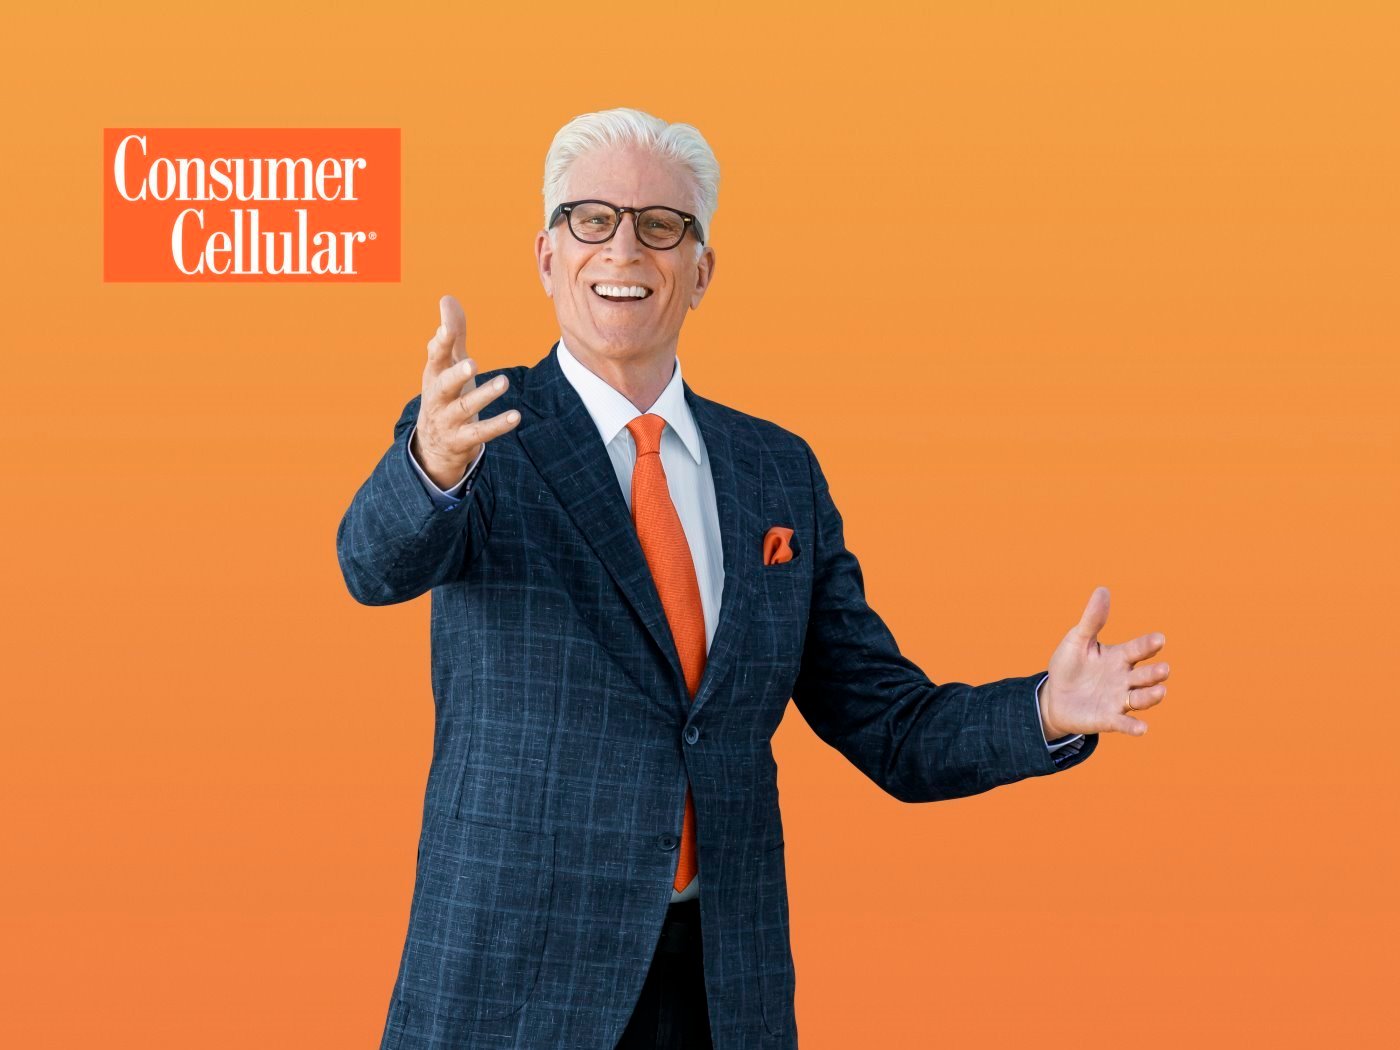 Consumer Cellular Taps Ted Danson To Be Celebrity Spokesperson